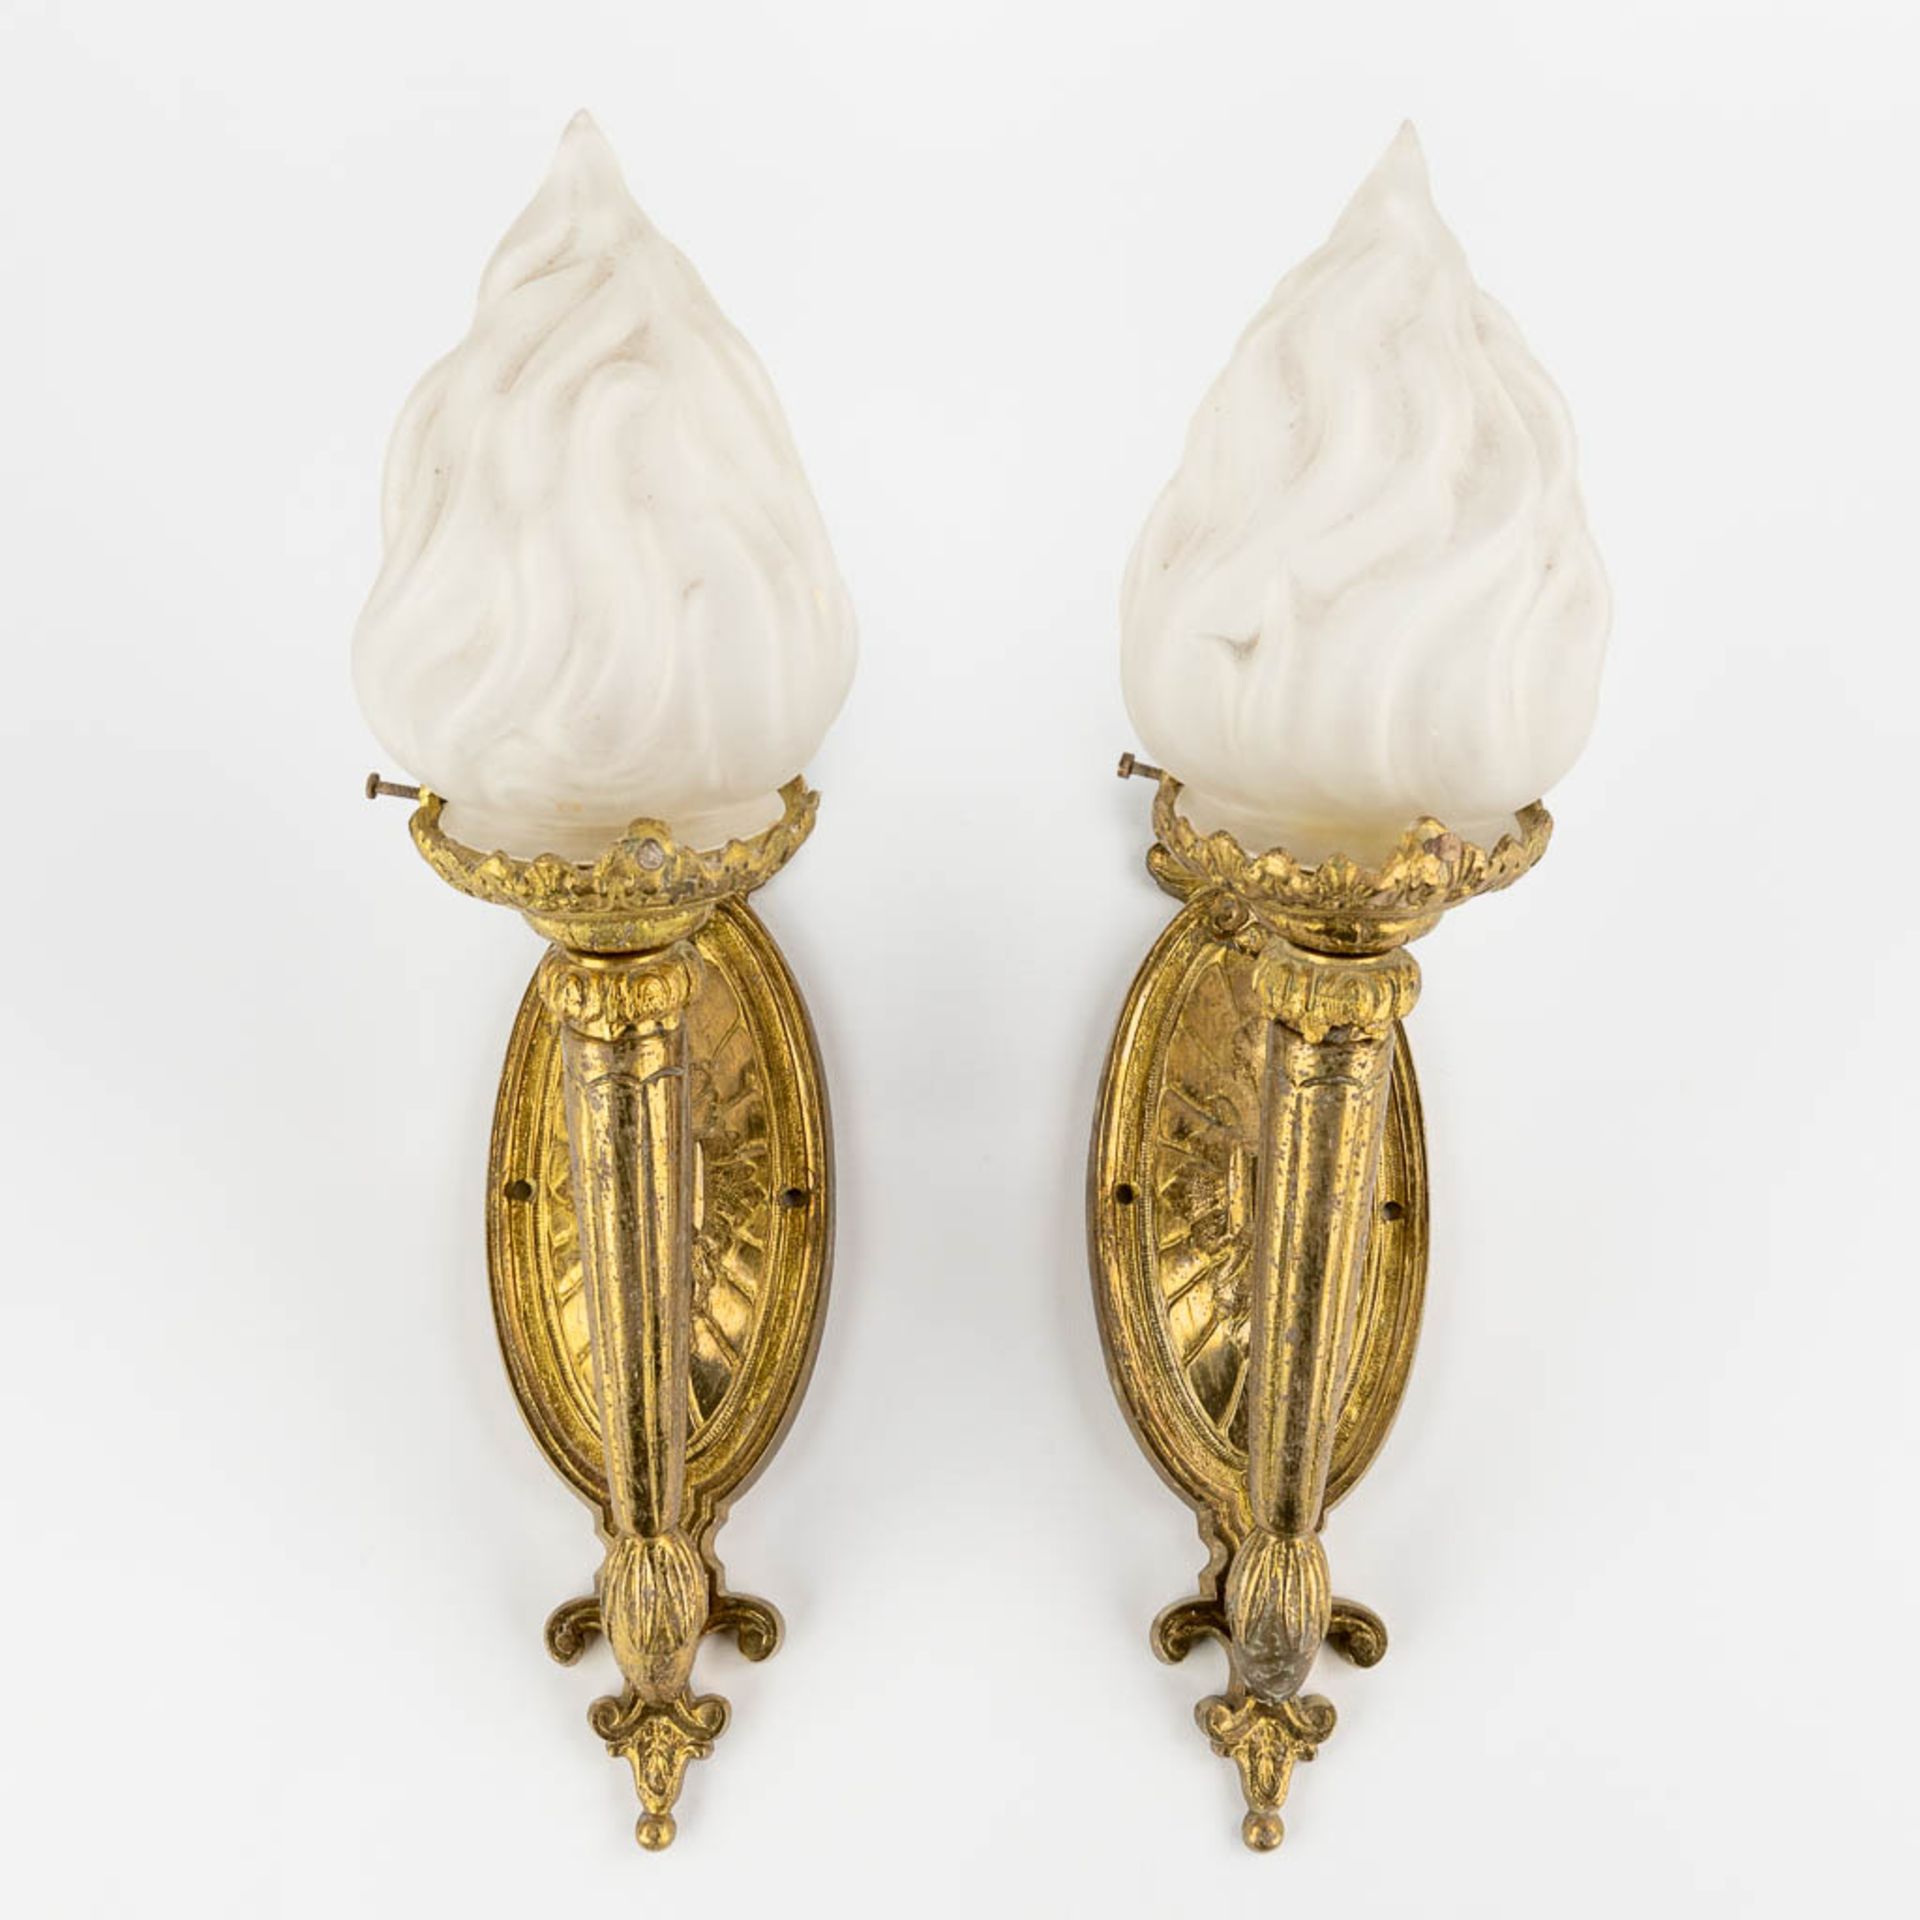 A pair of wall-mounted gilt bronze torches with a glass shade. Circa 1920. (D:21 x W:9 x H:39 cm)